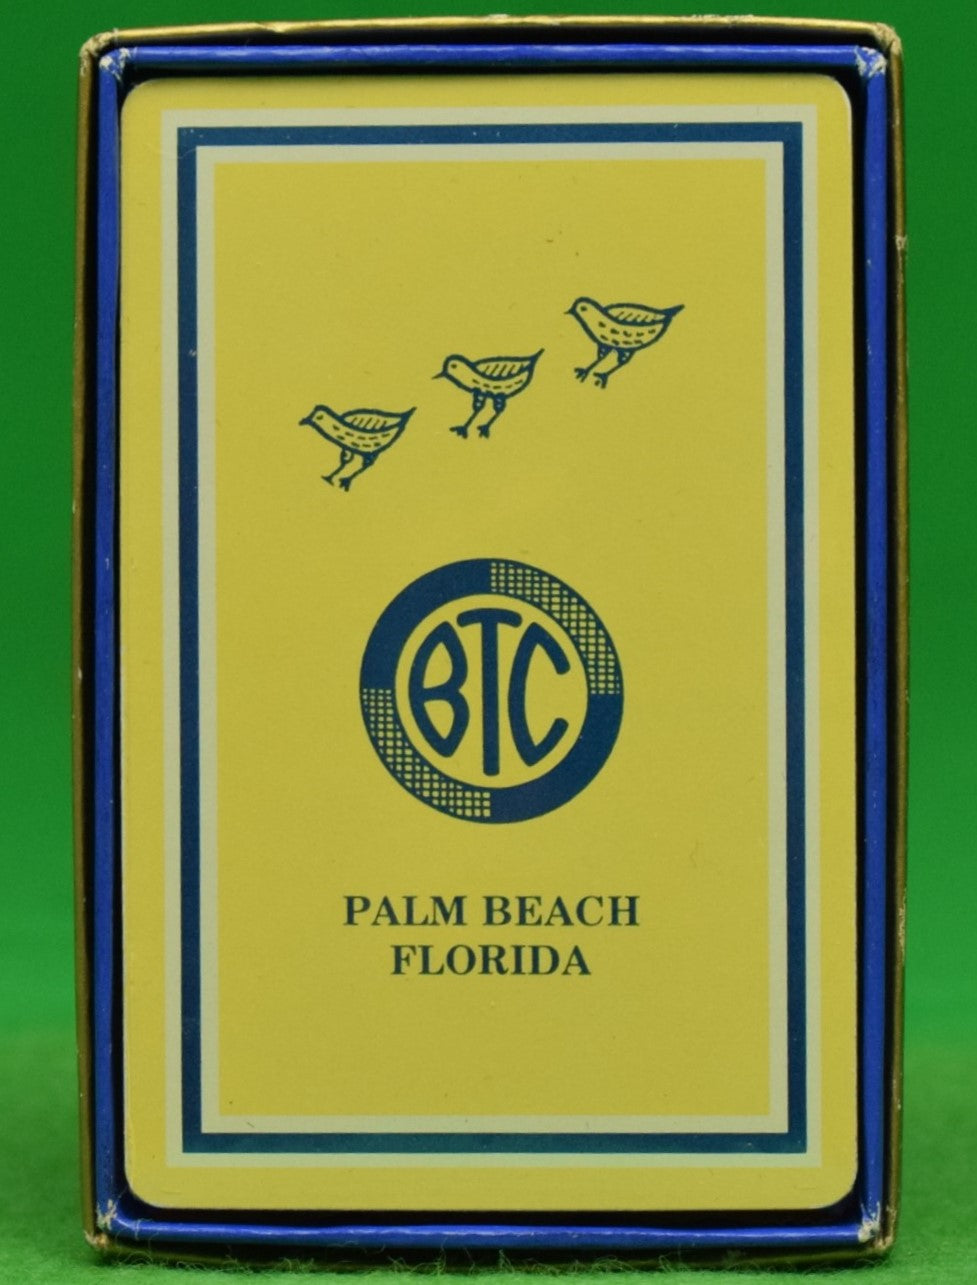 "Bath & Tennis Club Palm Beach Sealed Deck of Yellow Playing Cards" (New in Box!) (SOLD)